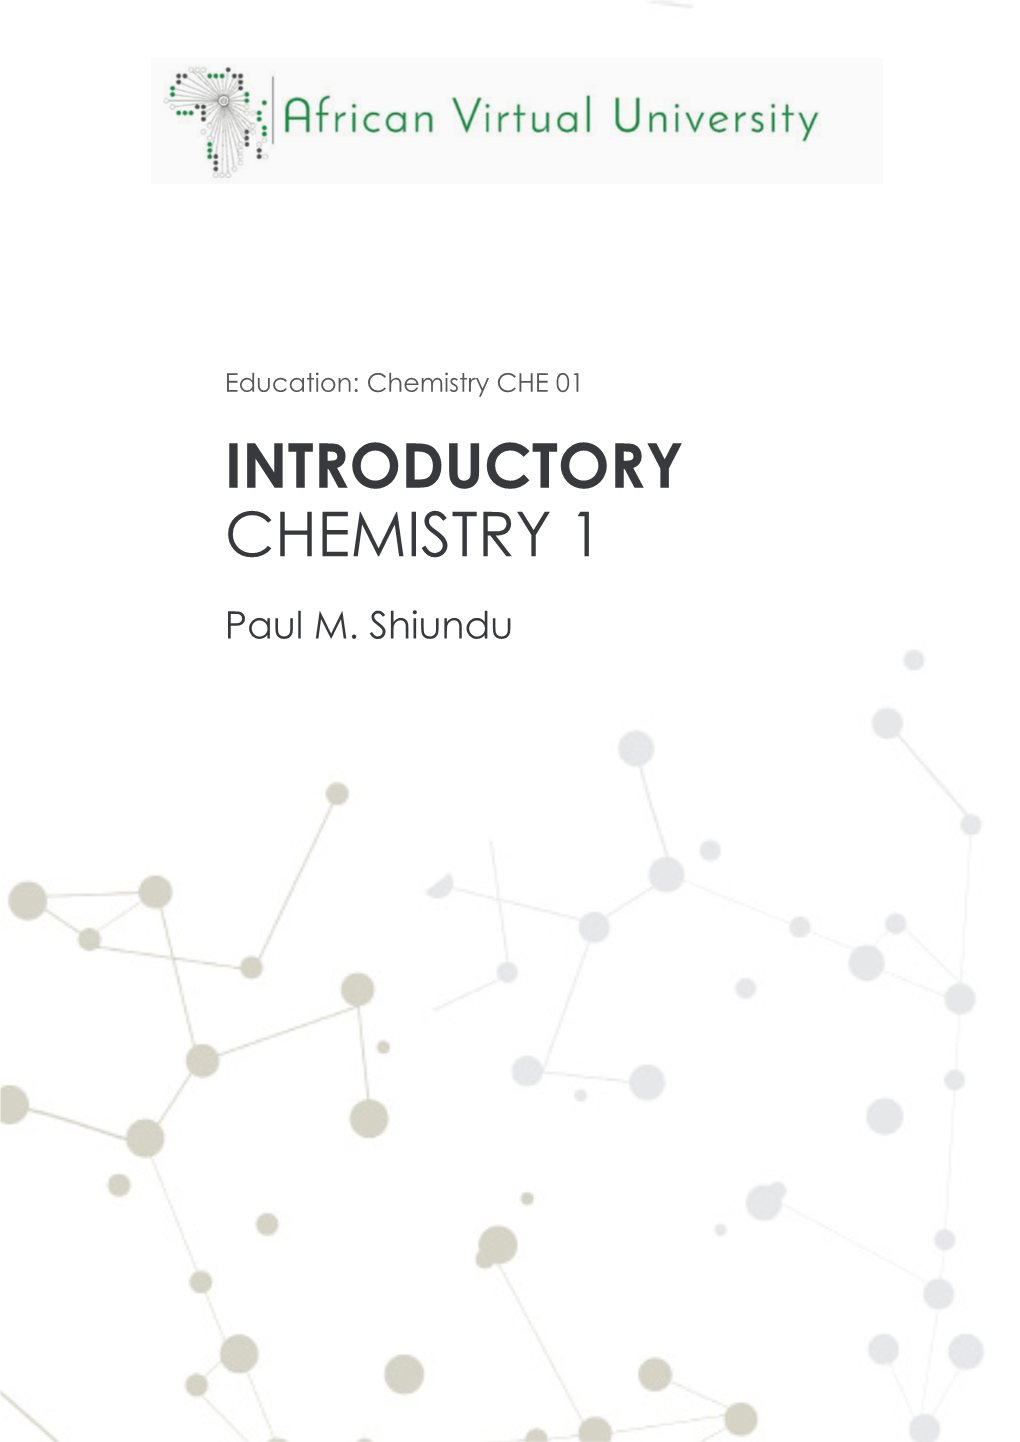 INTRODUCTORY CHEMISTRY 1 Paul M